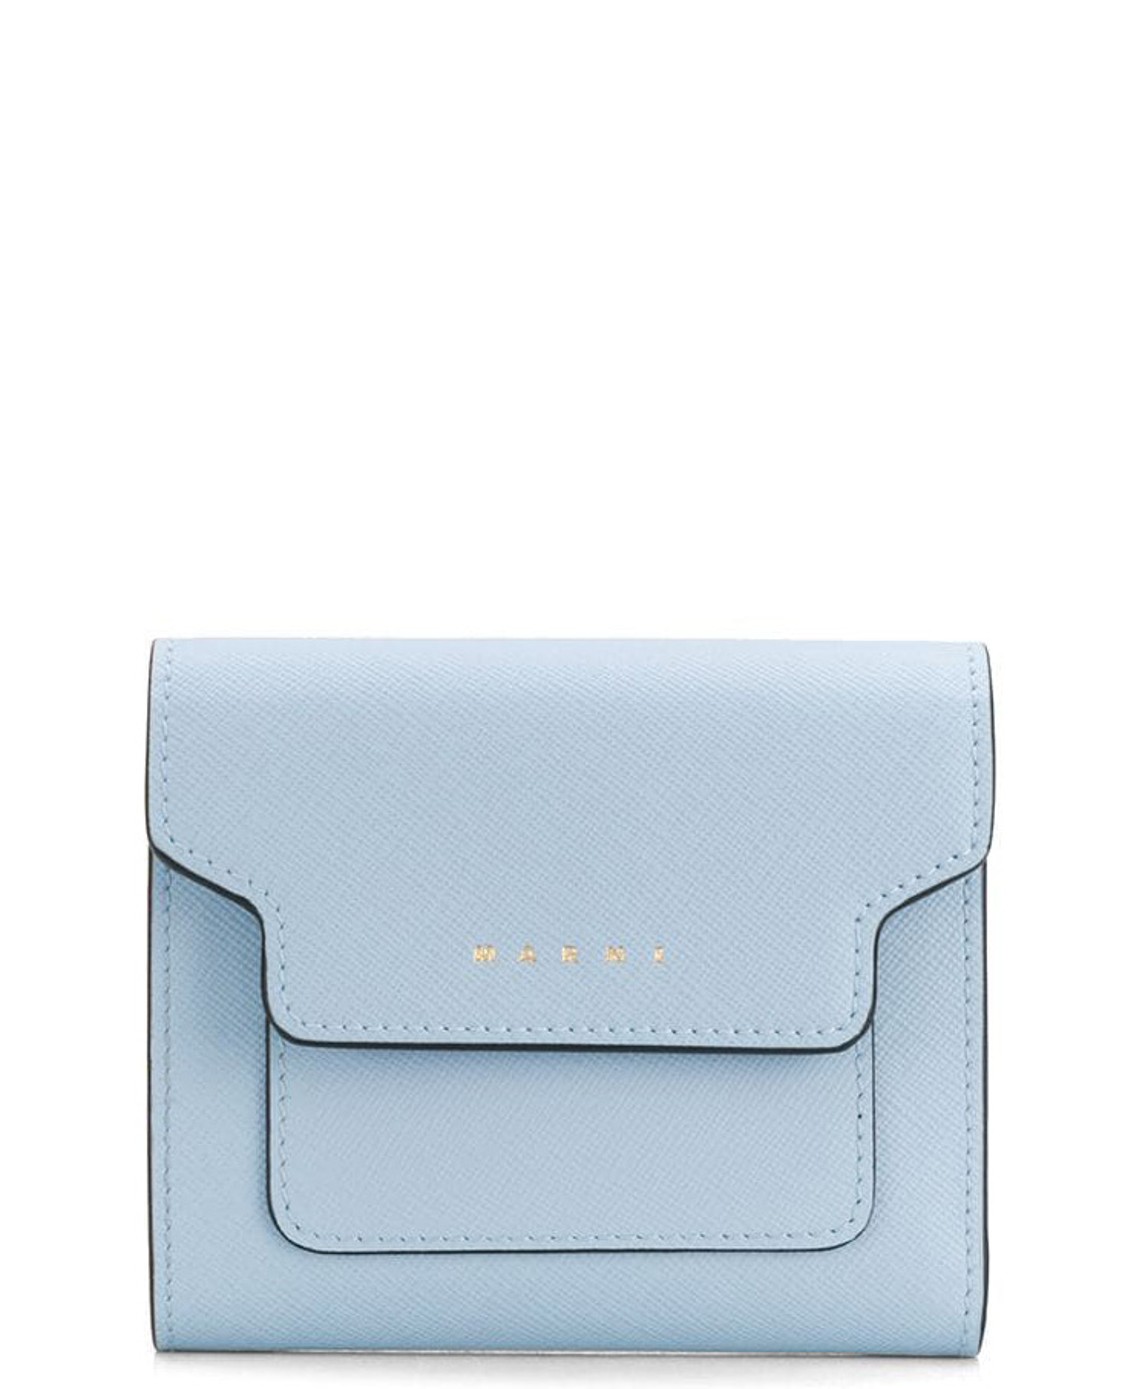 shop Marni  Accessories: Accessories Marni, wallet, squared, in calfskin, closure with pressure botton, golden logo on front, zip pocket for coins, 4 pockets for cards, 1 pocket for notes.

Composition: 100% leather.
Dimension: Height 10 cm.
 number 1854